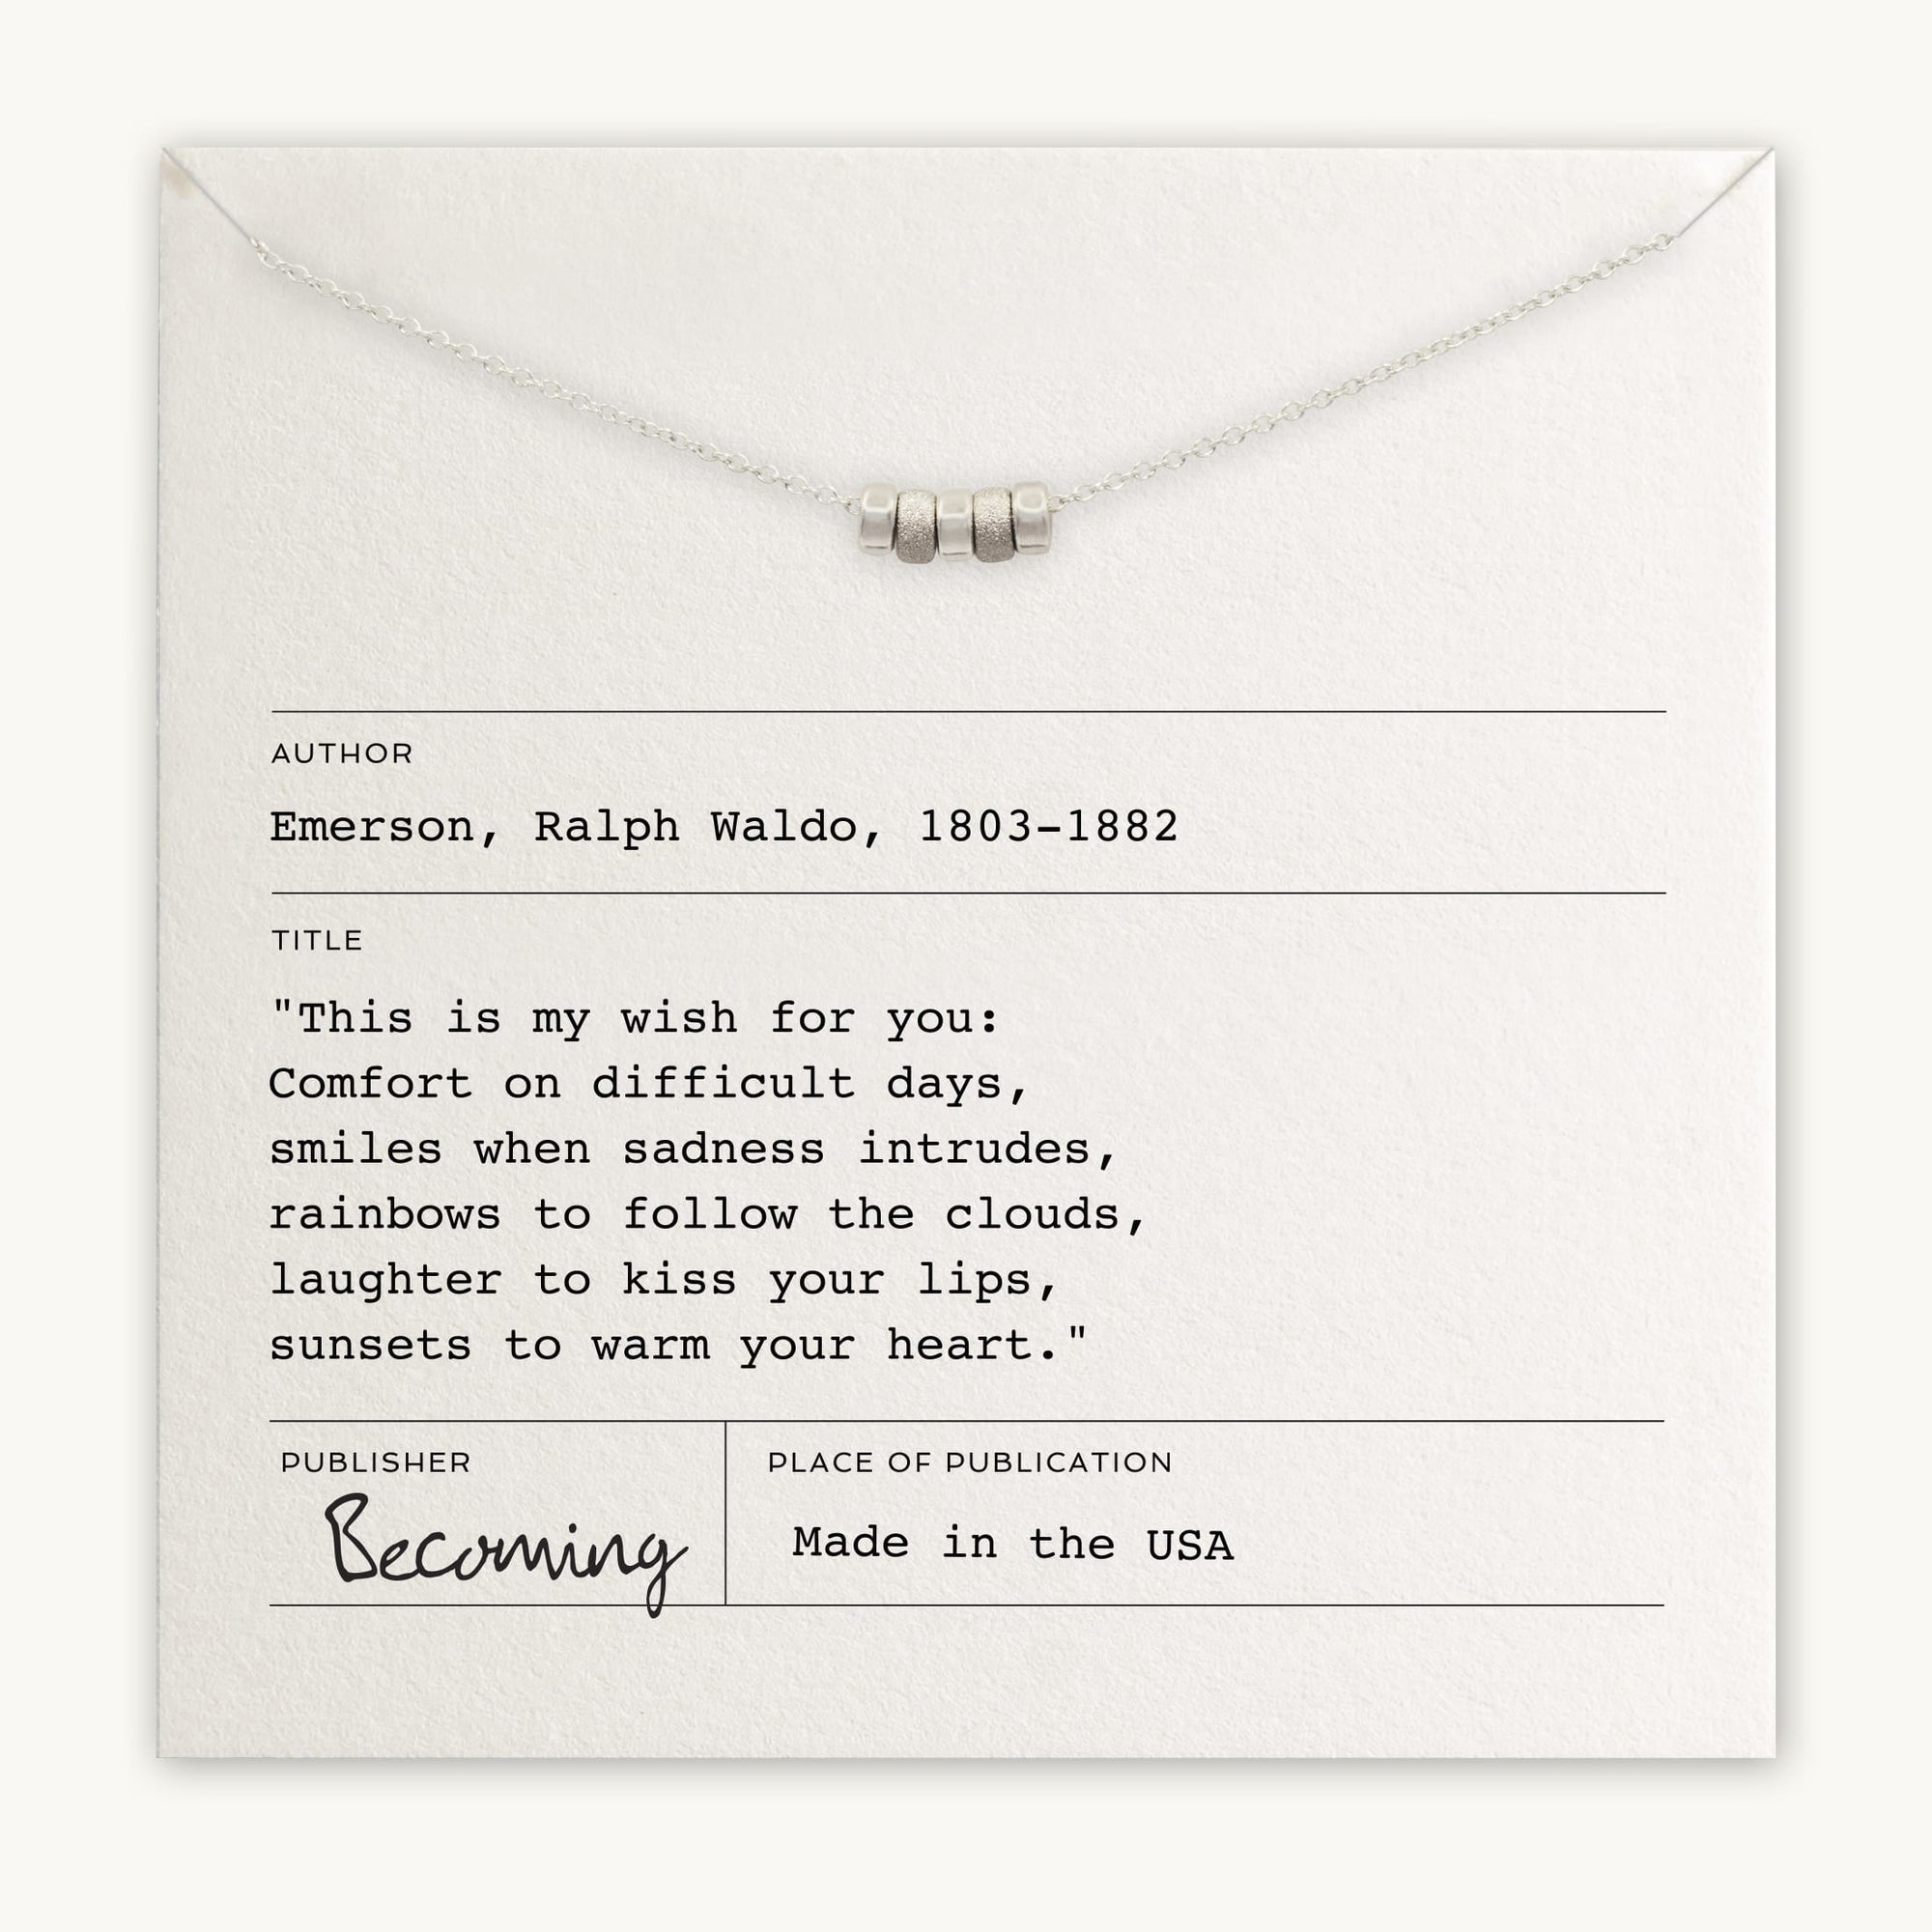 Becoming Jewelry&#39;s My Wish For You Necklace, with a three-bar pendant, displayed on a card with an inspirational message by Ralph Waldo Emerson.